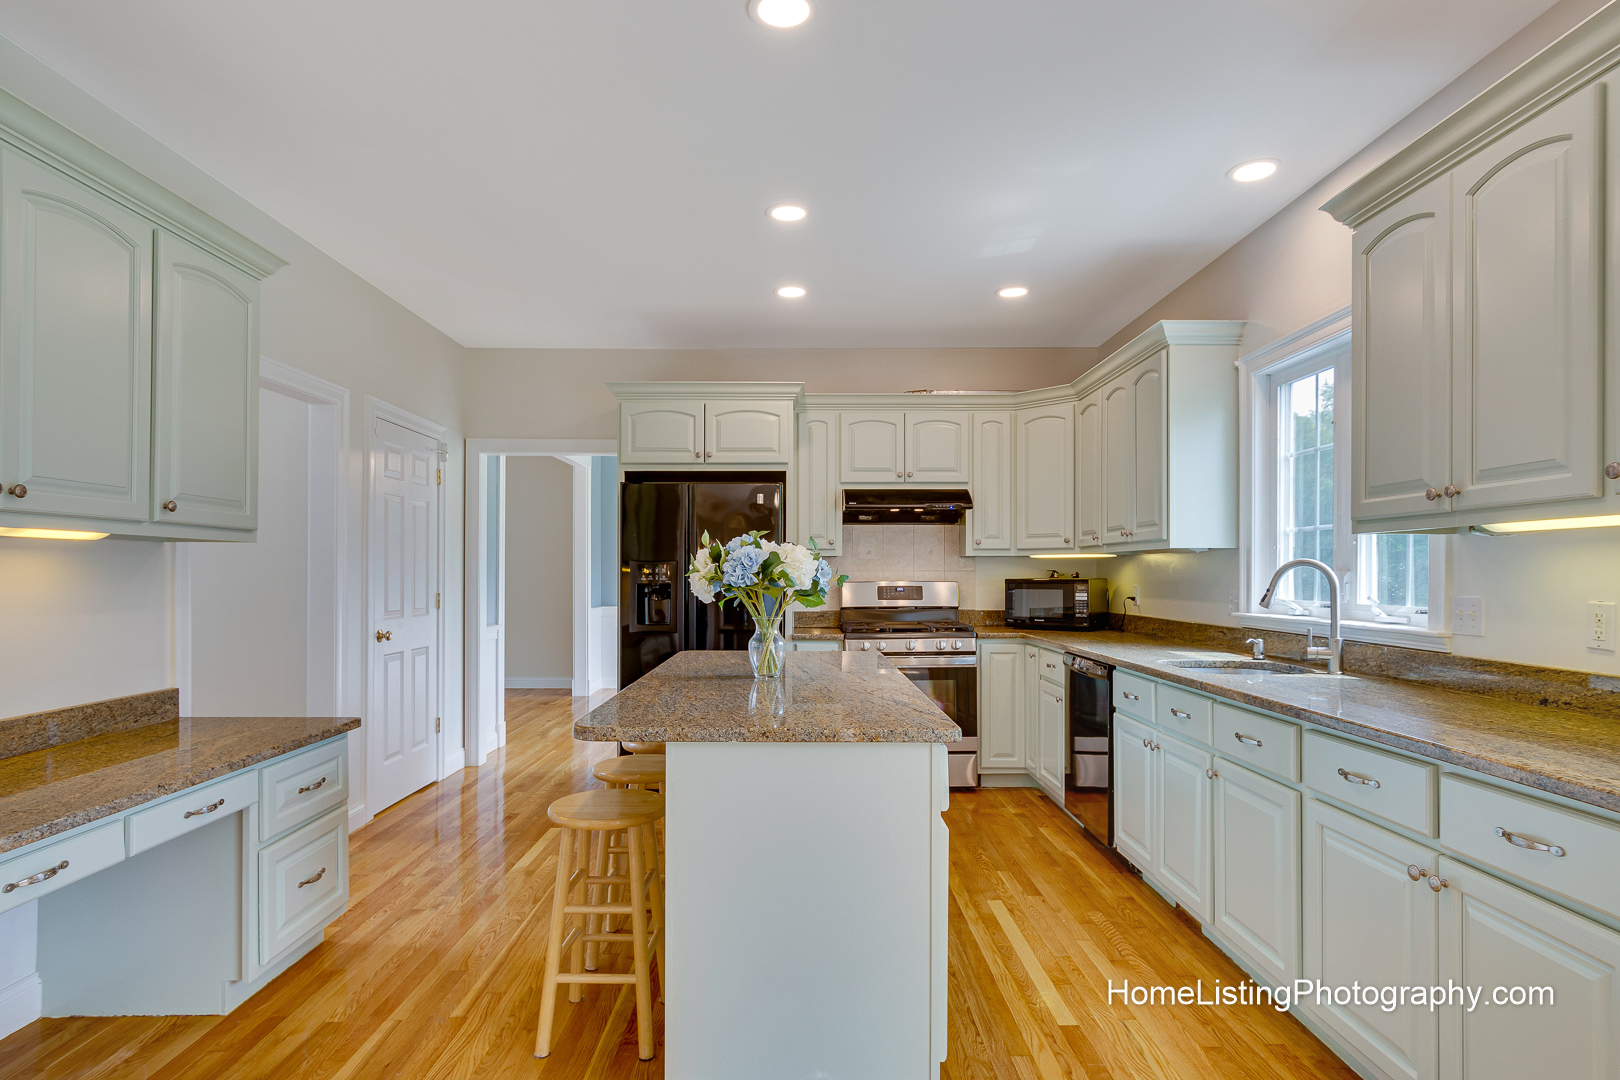 Thomas Adach -Northborough MA professional real estate photographer - 508-655-2225 Home Listing Photography